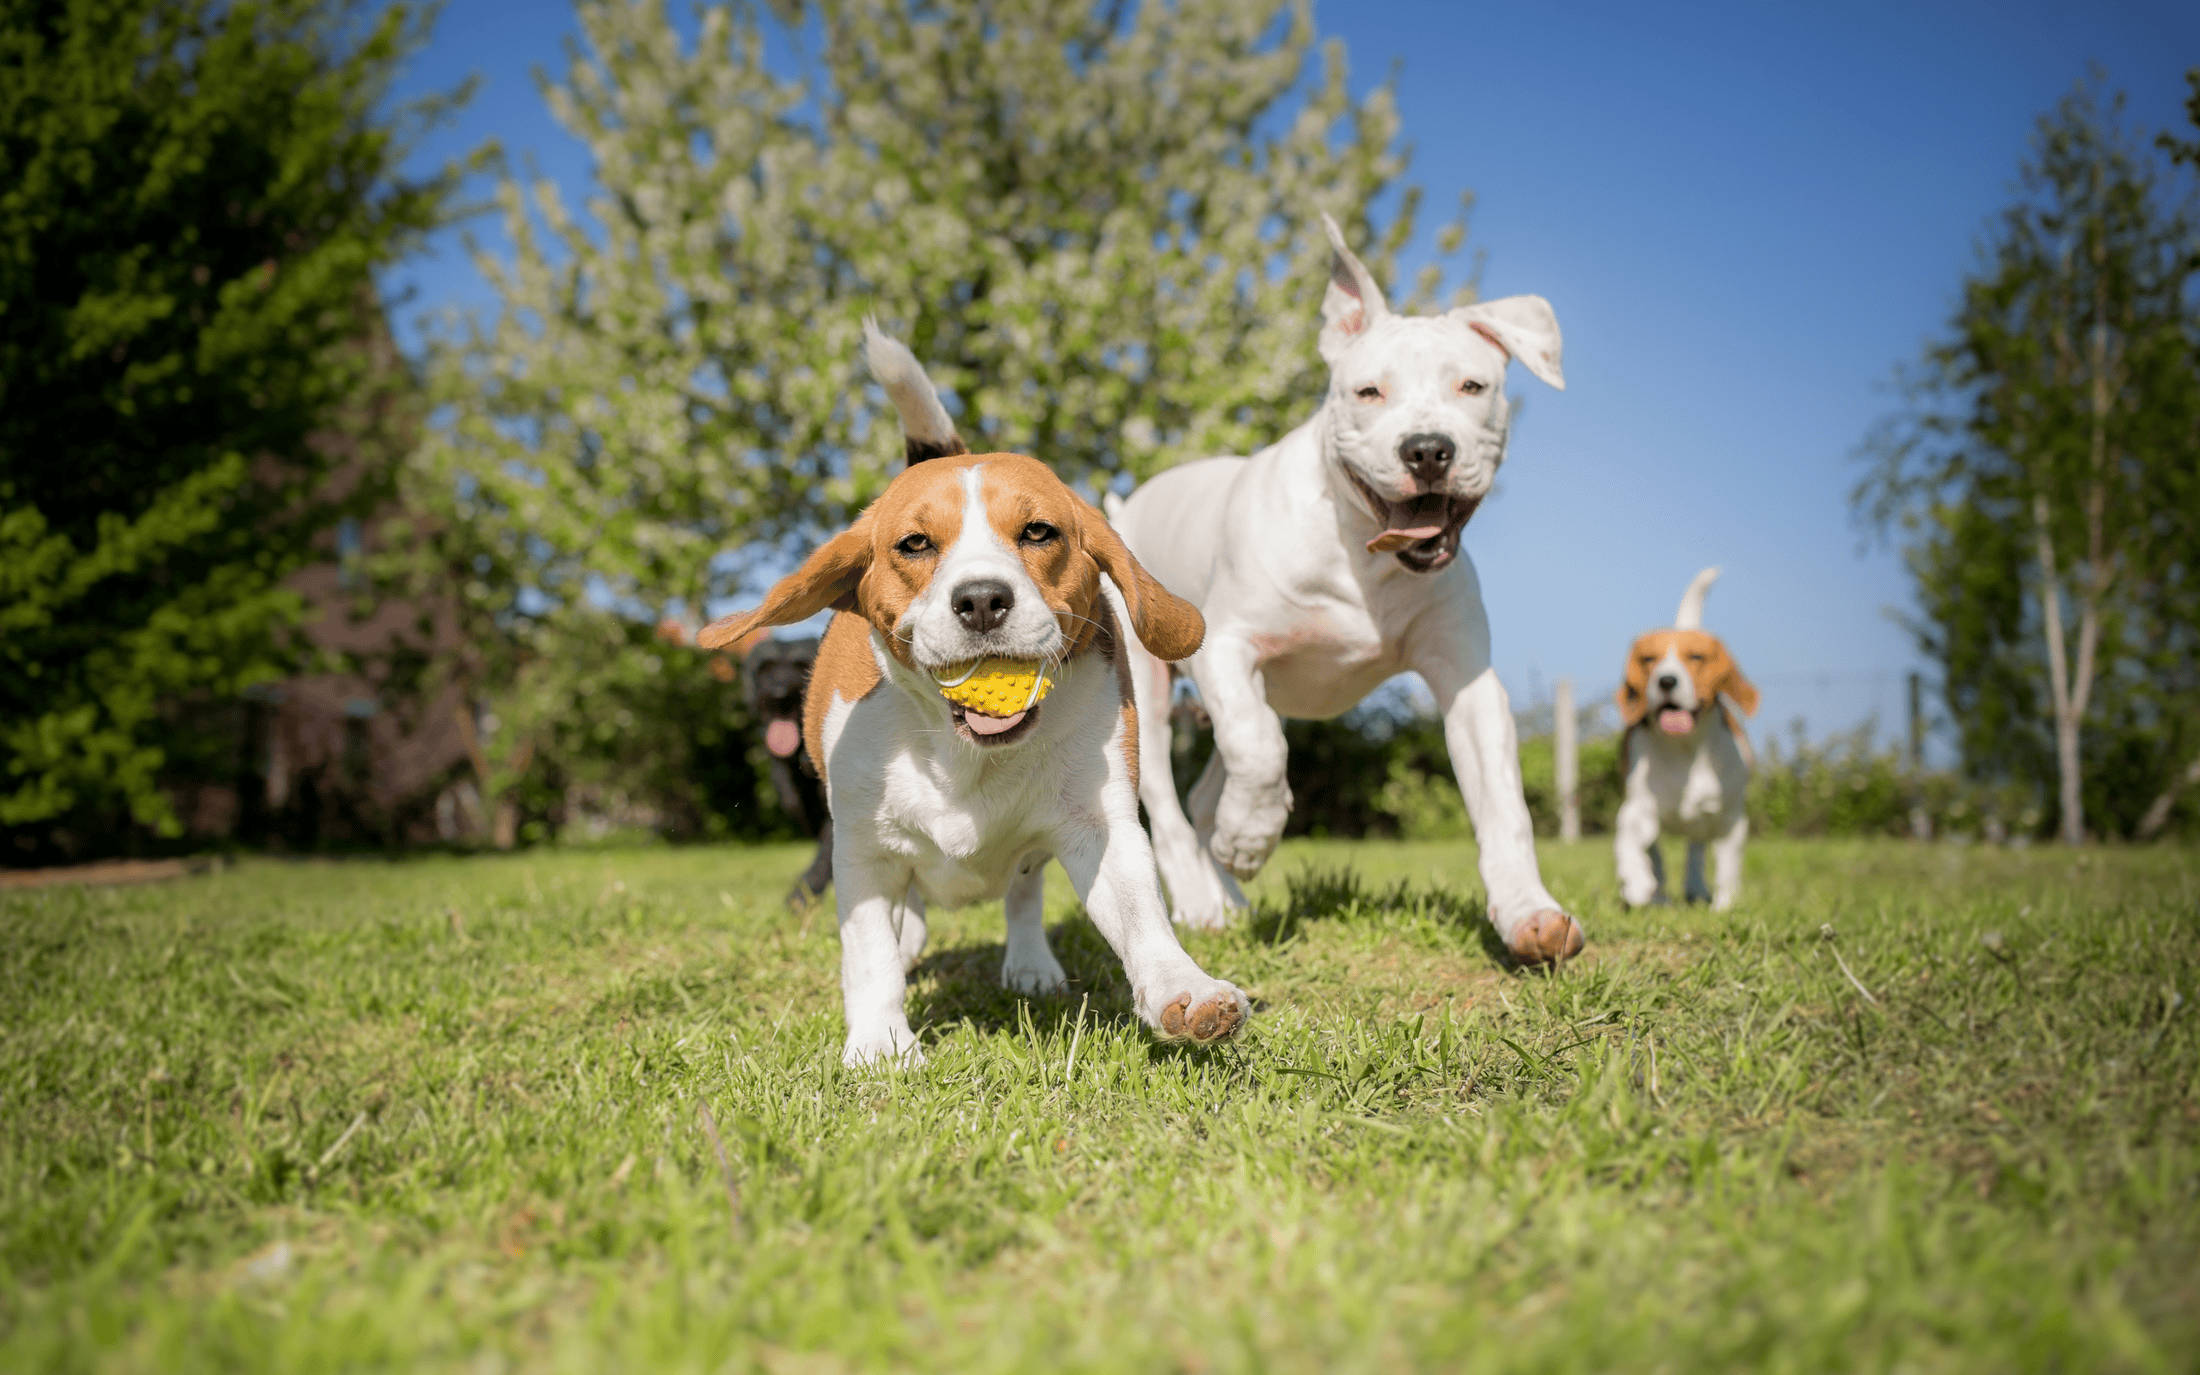 Puppy classes, dog parks, and play dates with other puppies are important for social animal behavior.